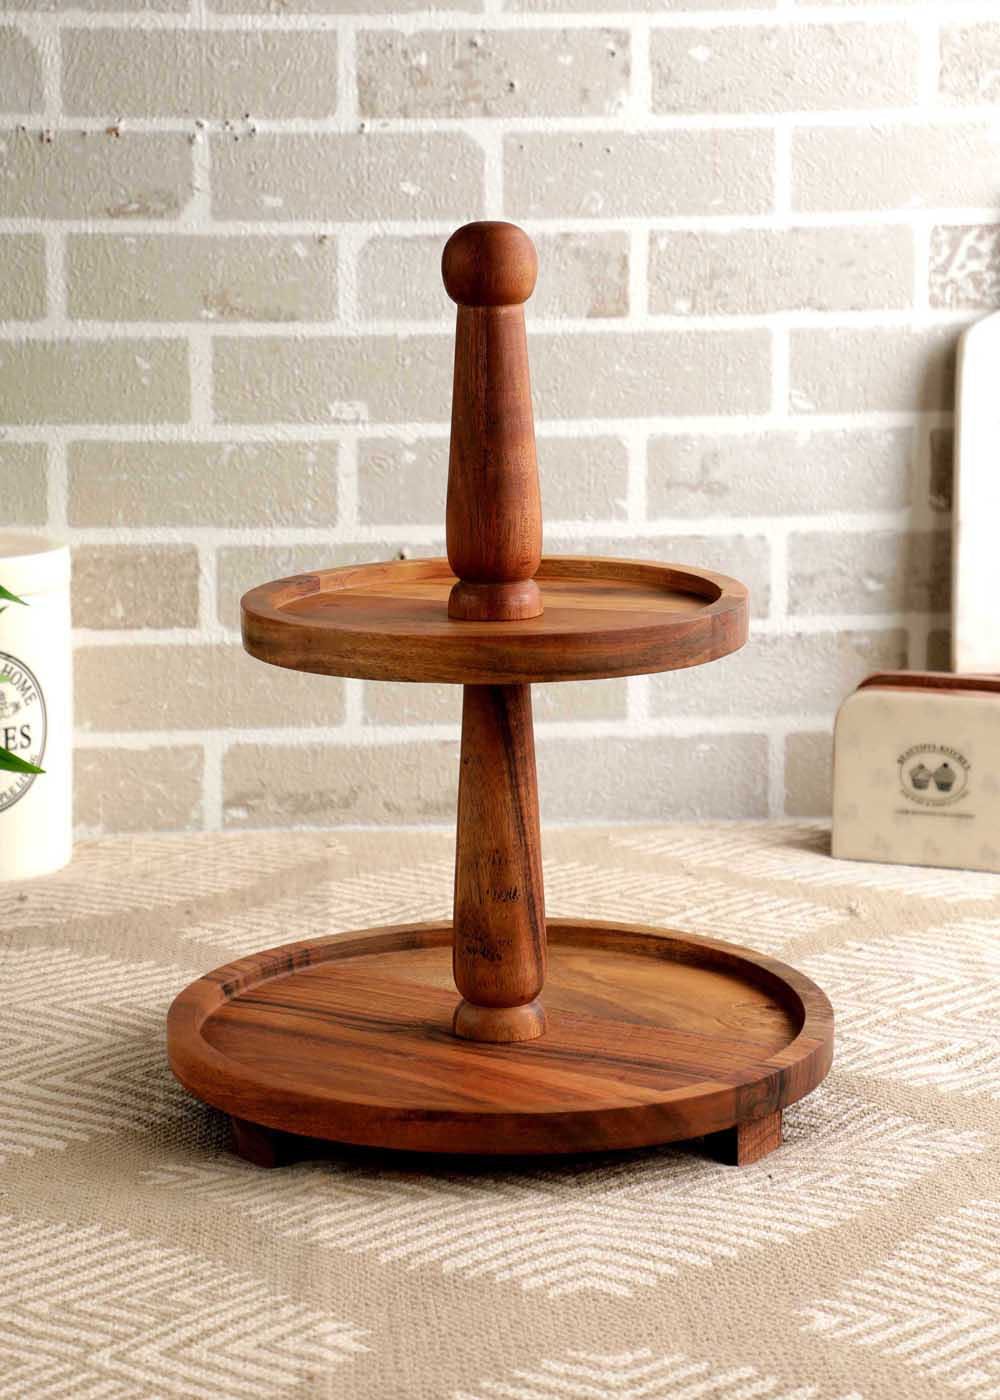 Tiered Wooden Cake Stand - Folksy